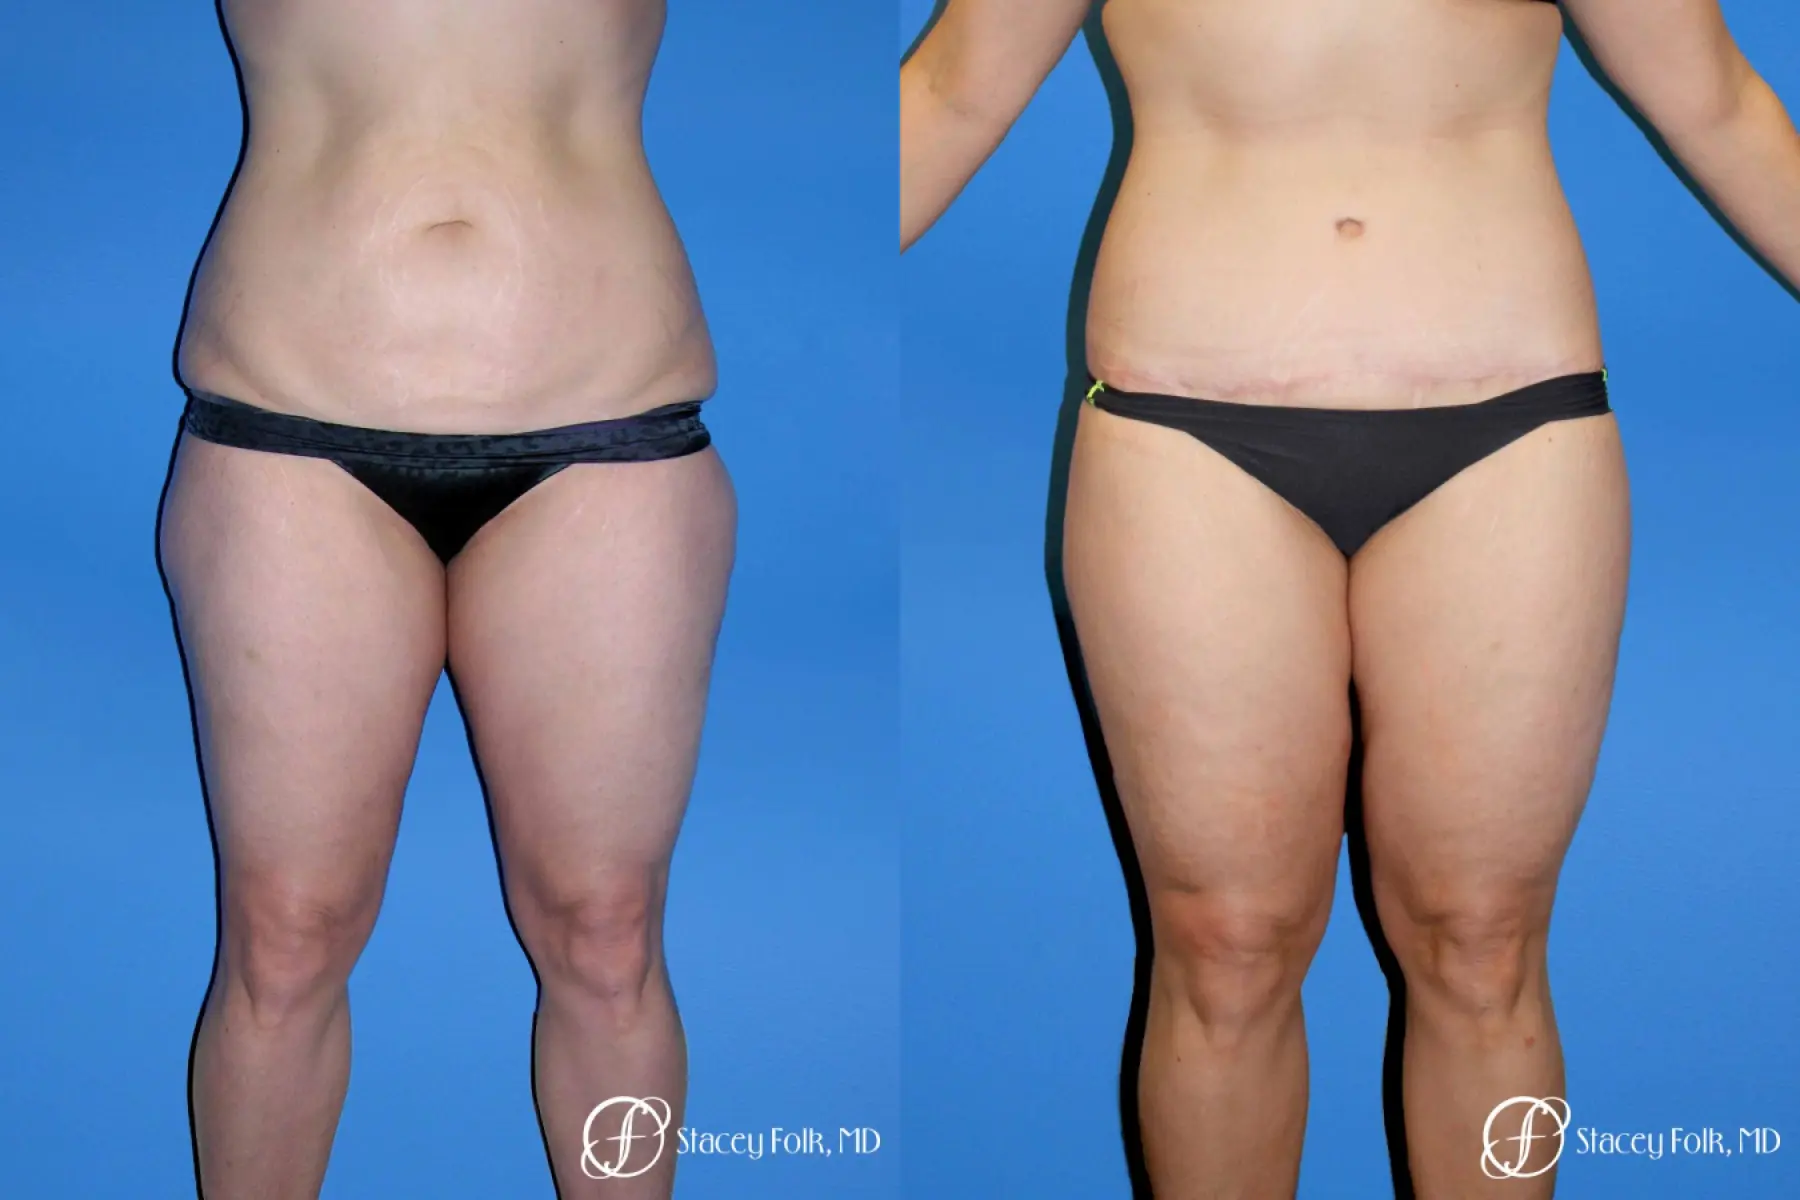 Denver Body Lift Belt lipectomy & liposuction 5264 - Before and After